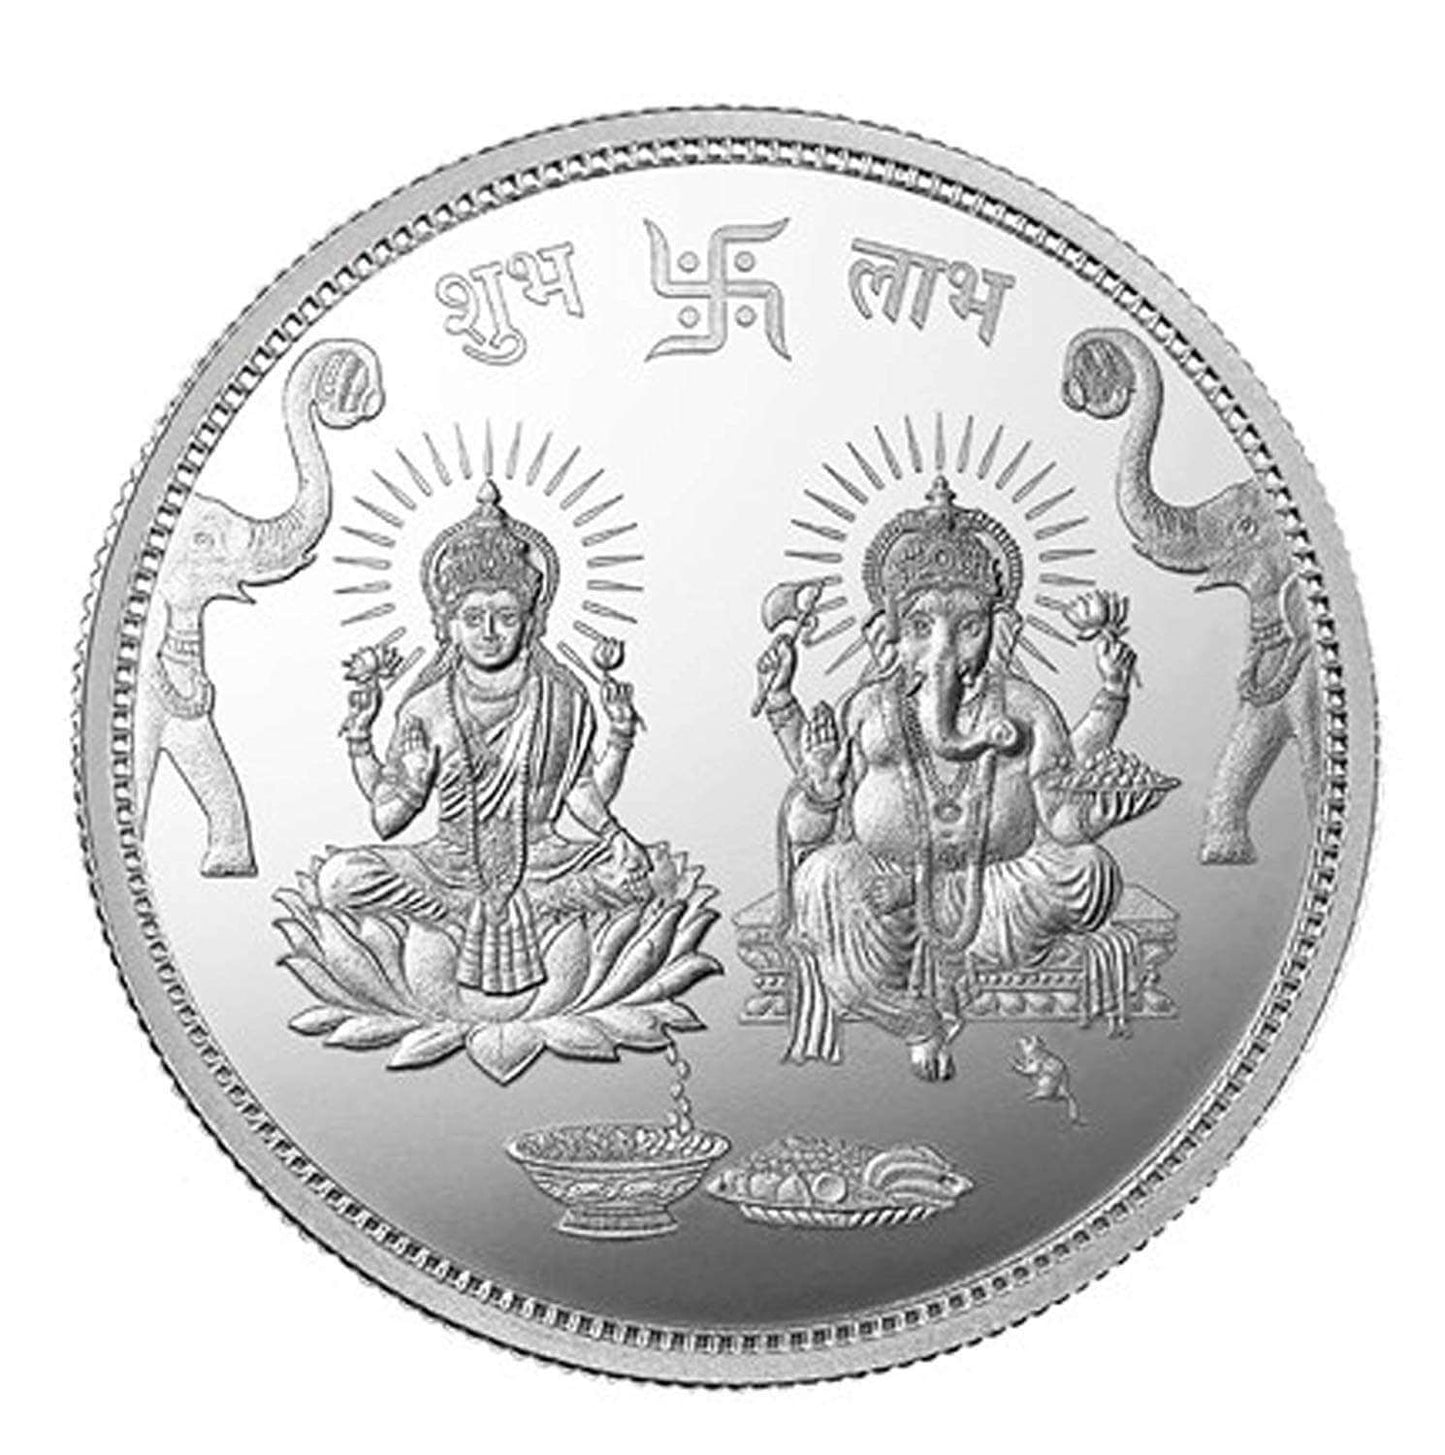 999.9 Purity Ganesh Lakshmi ji Silver Coins With Gift Wrap For Diwali ( Pack Of 2)